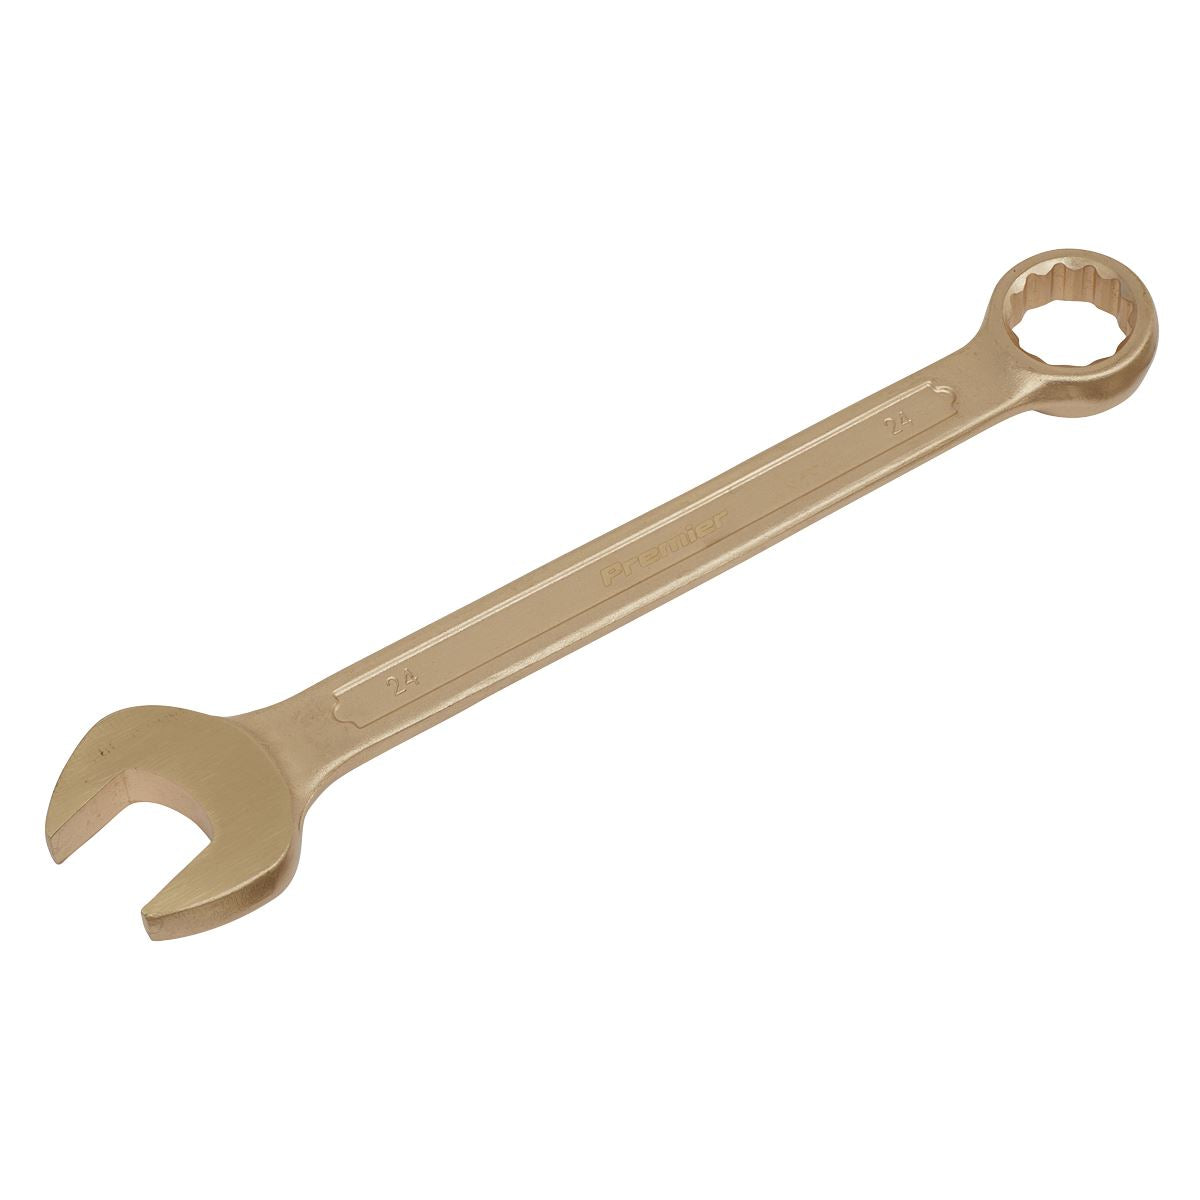 Sealey Premier Combination Spanner 24mm - Non-Sparking